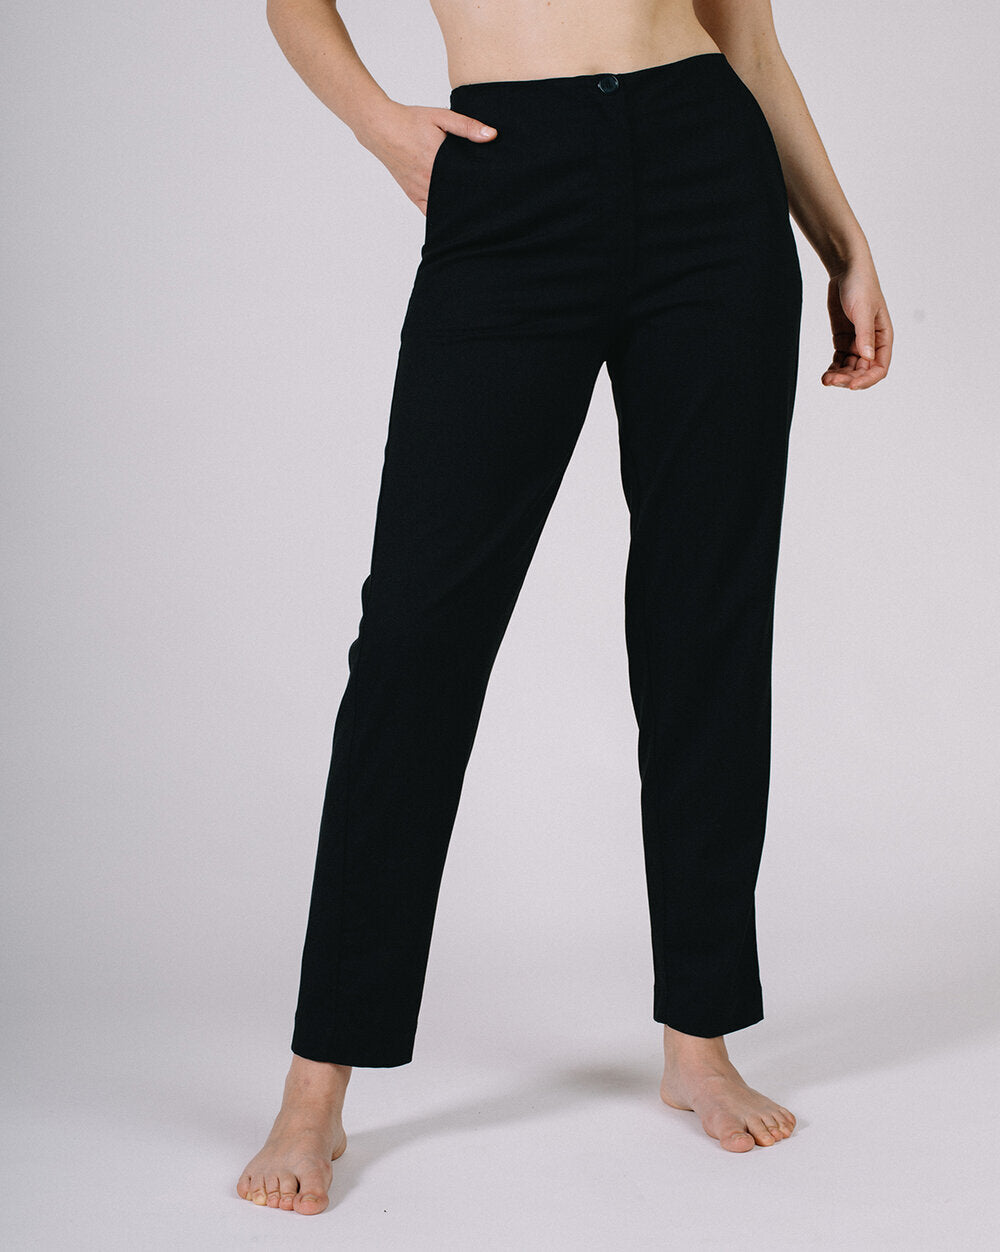 Workwear trousers - Berlin Black limited edition